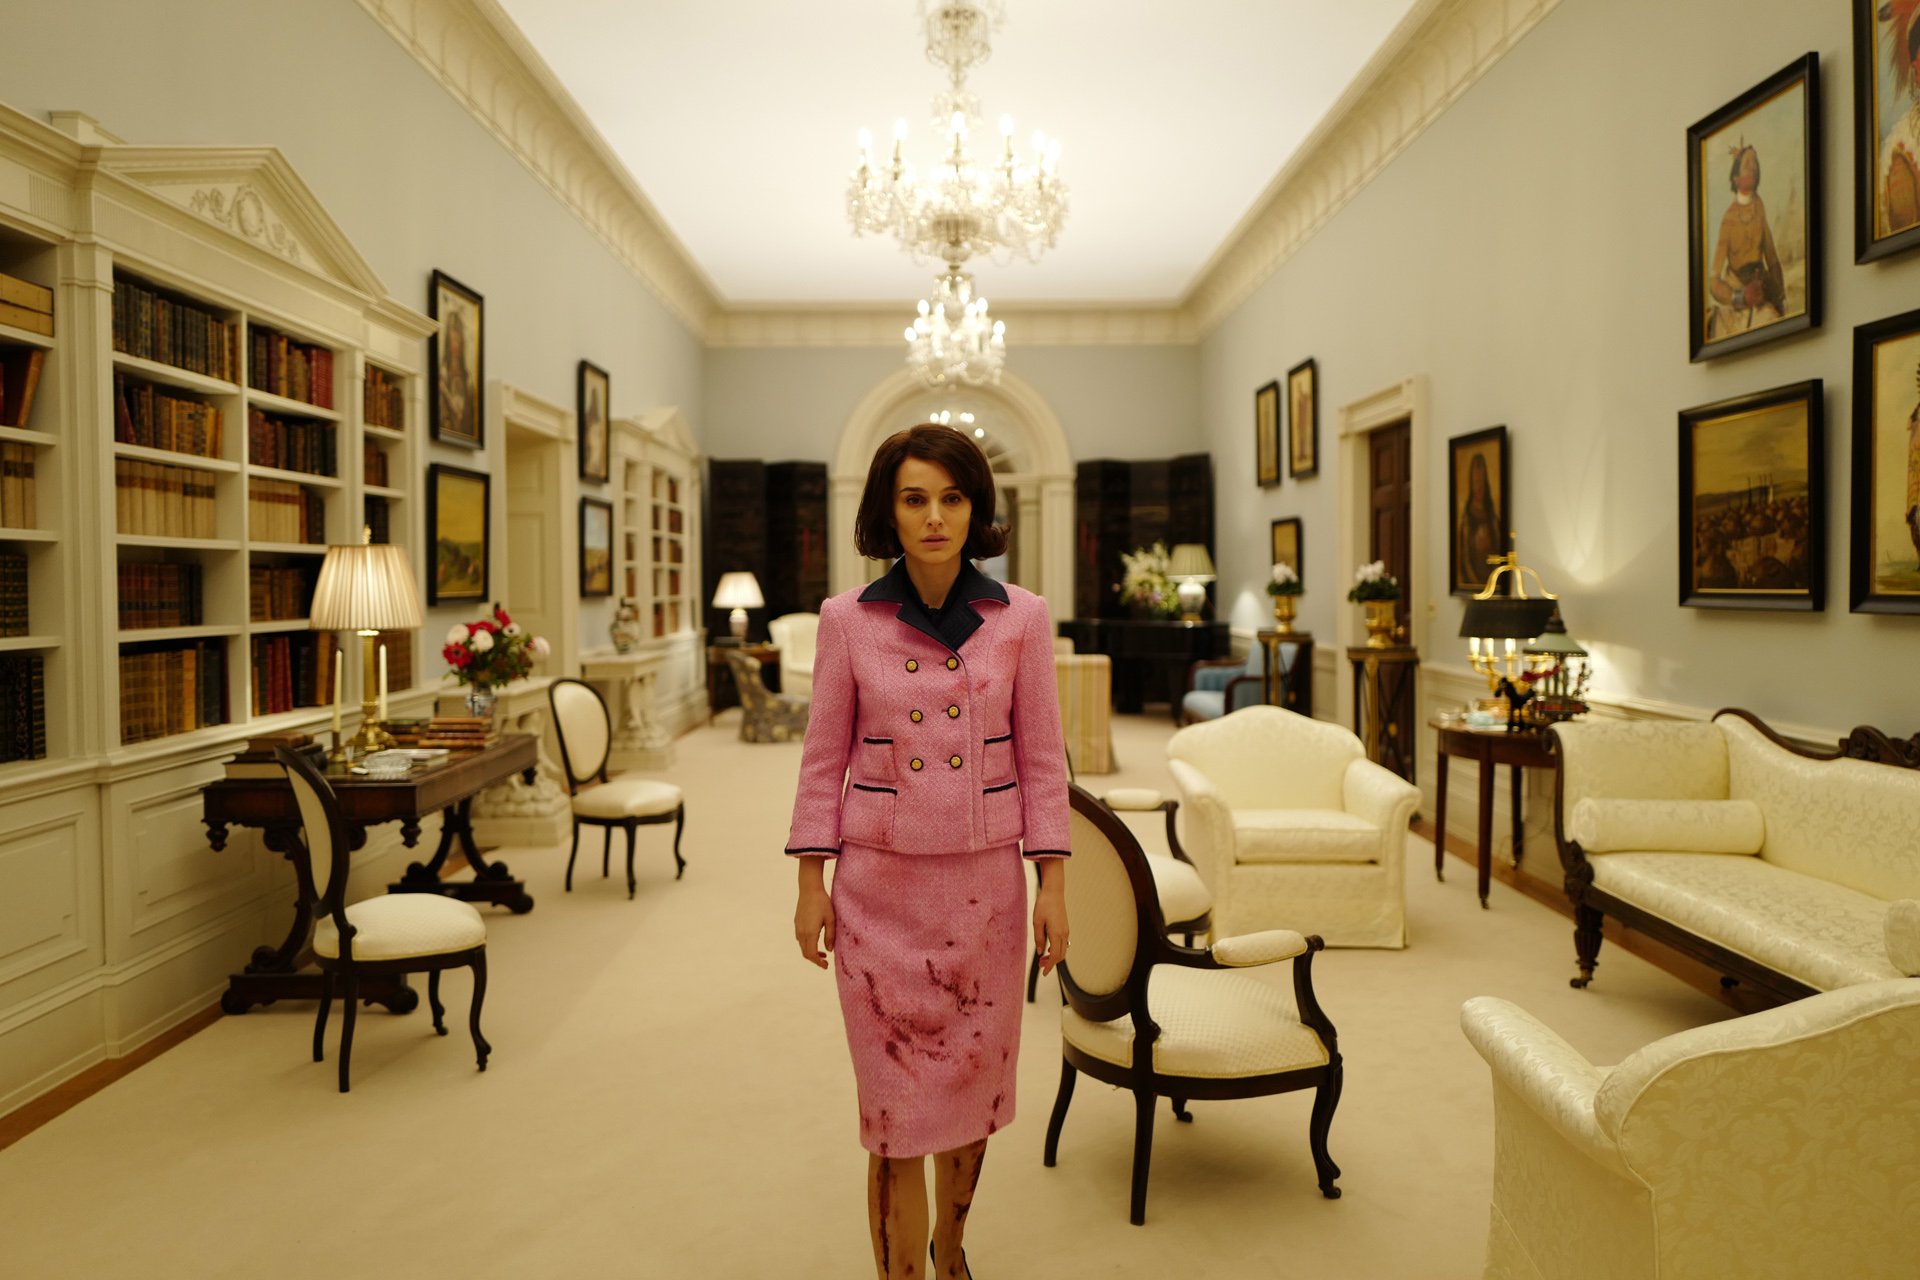 Natalie Portman stands in a White House set with a luminous ceiling